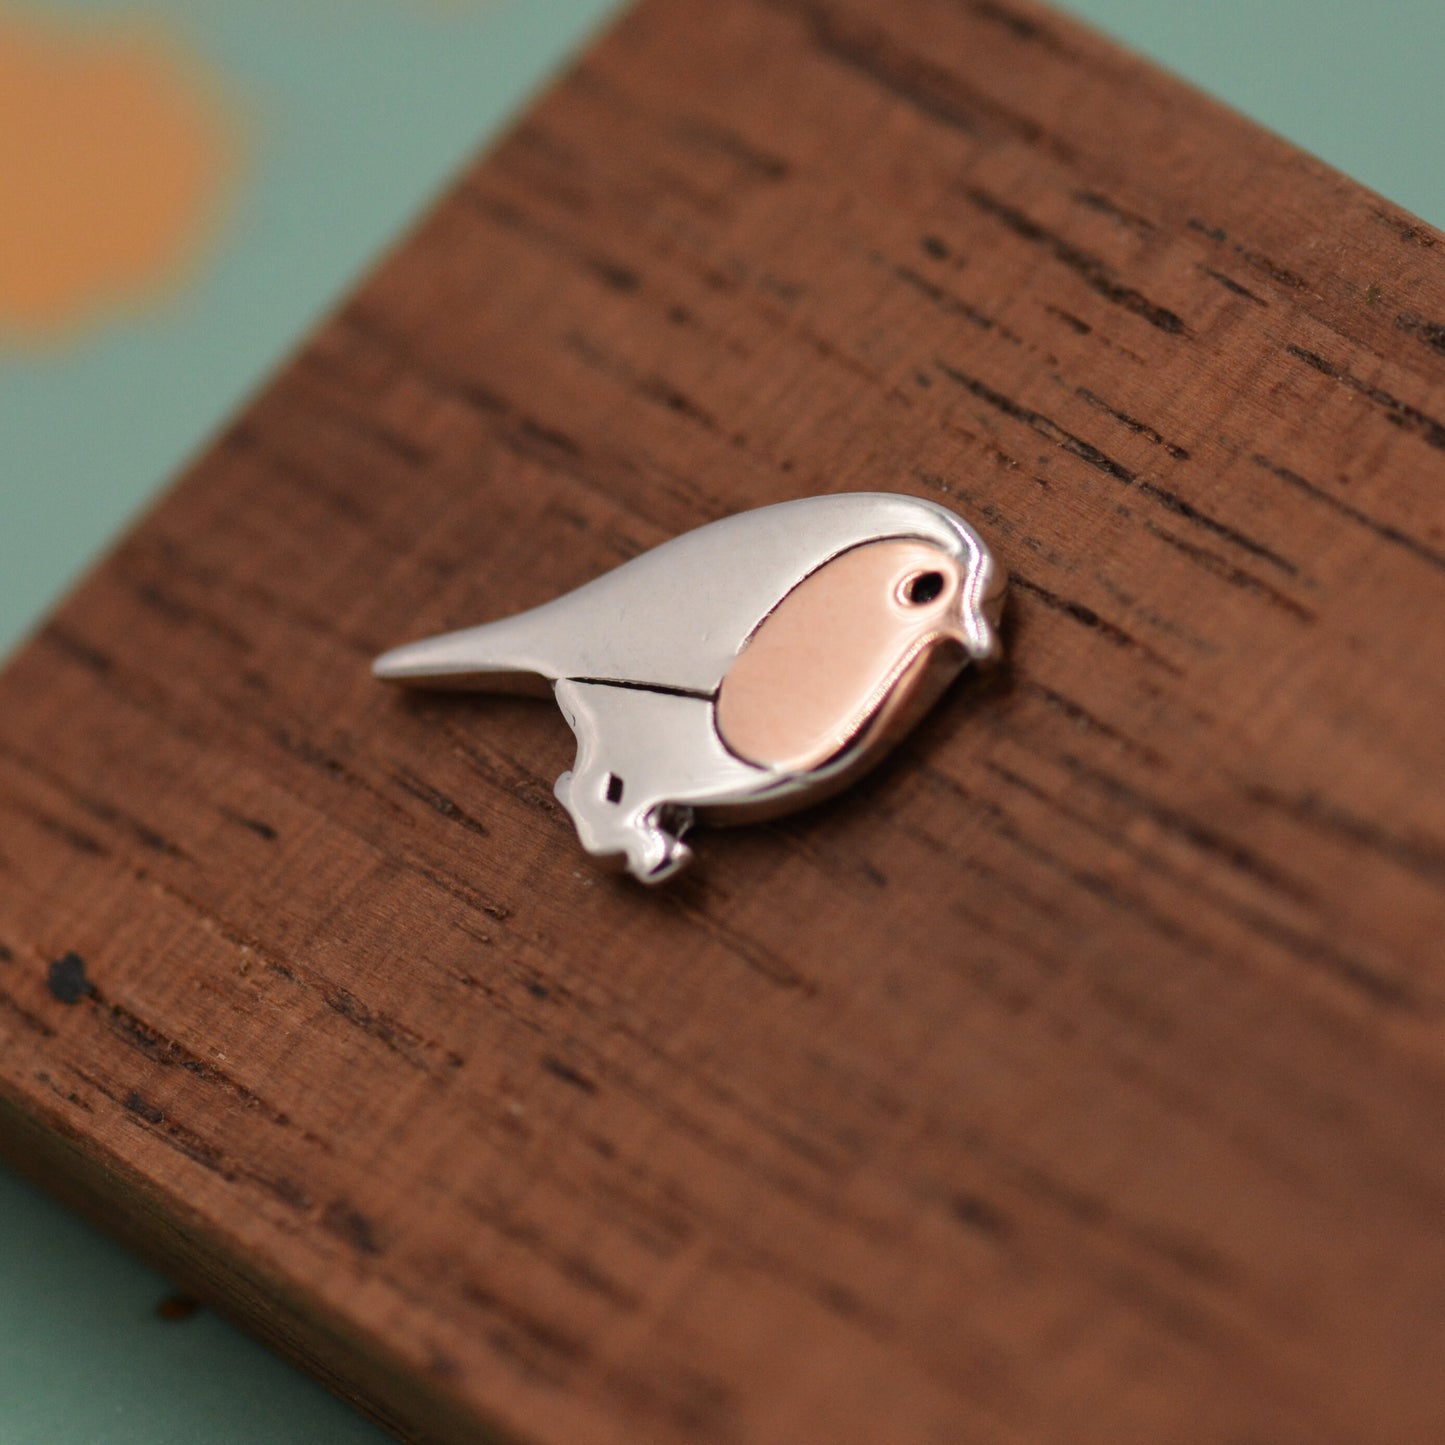 Robin Stud Earrings in Sterling Silver, Silver Bird Earrings, Silver and Rose Gold, Nature Inspired